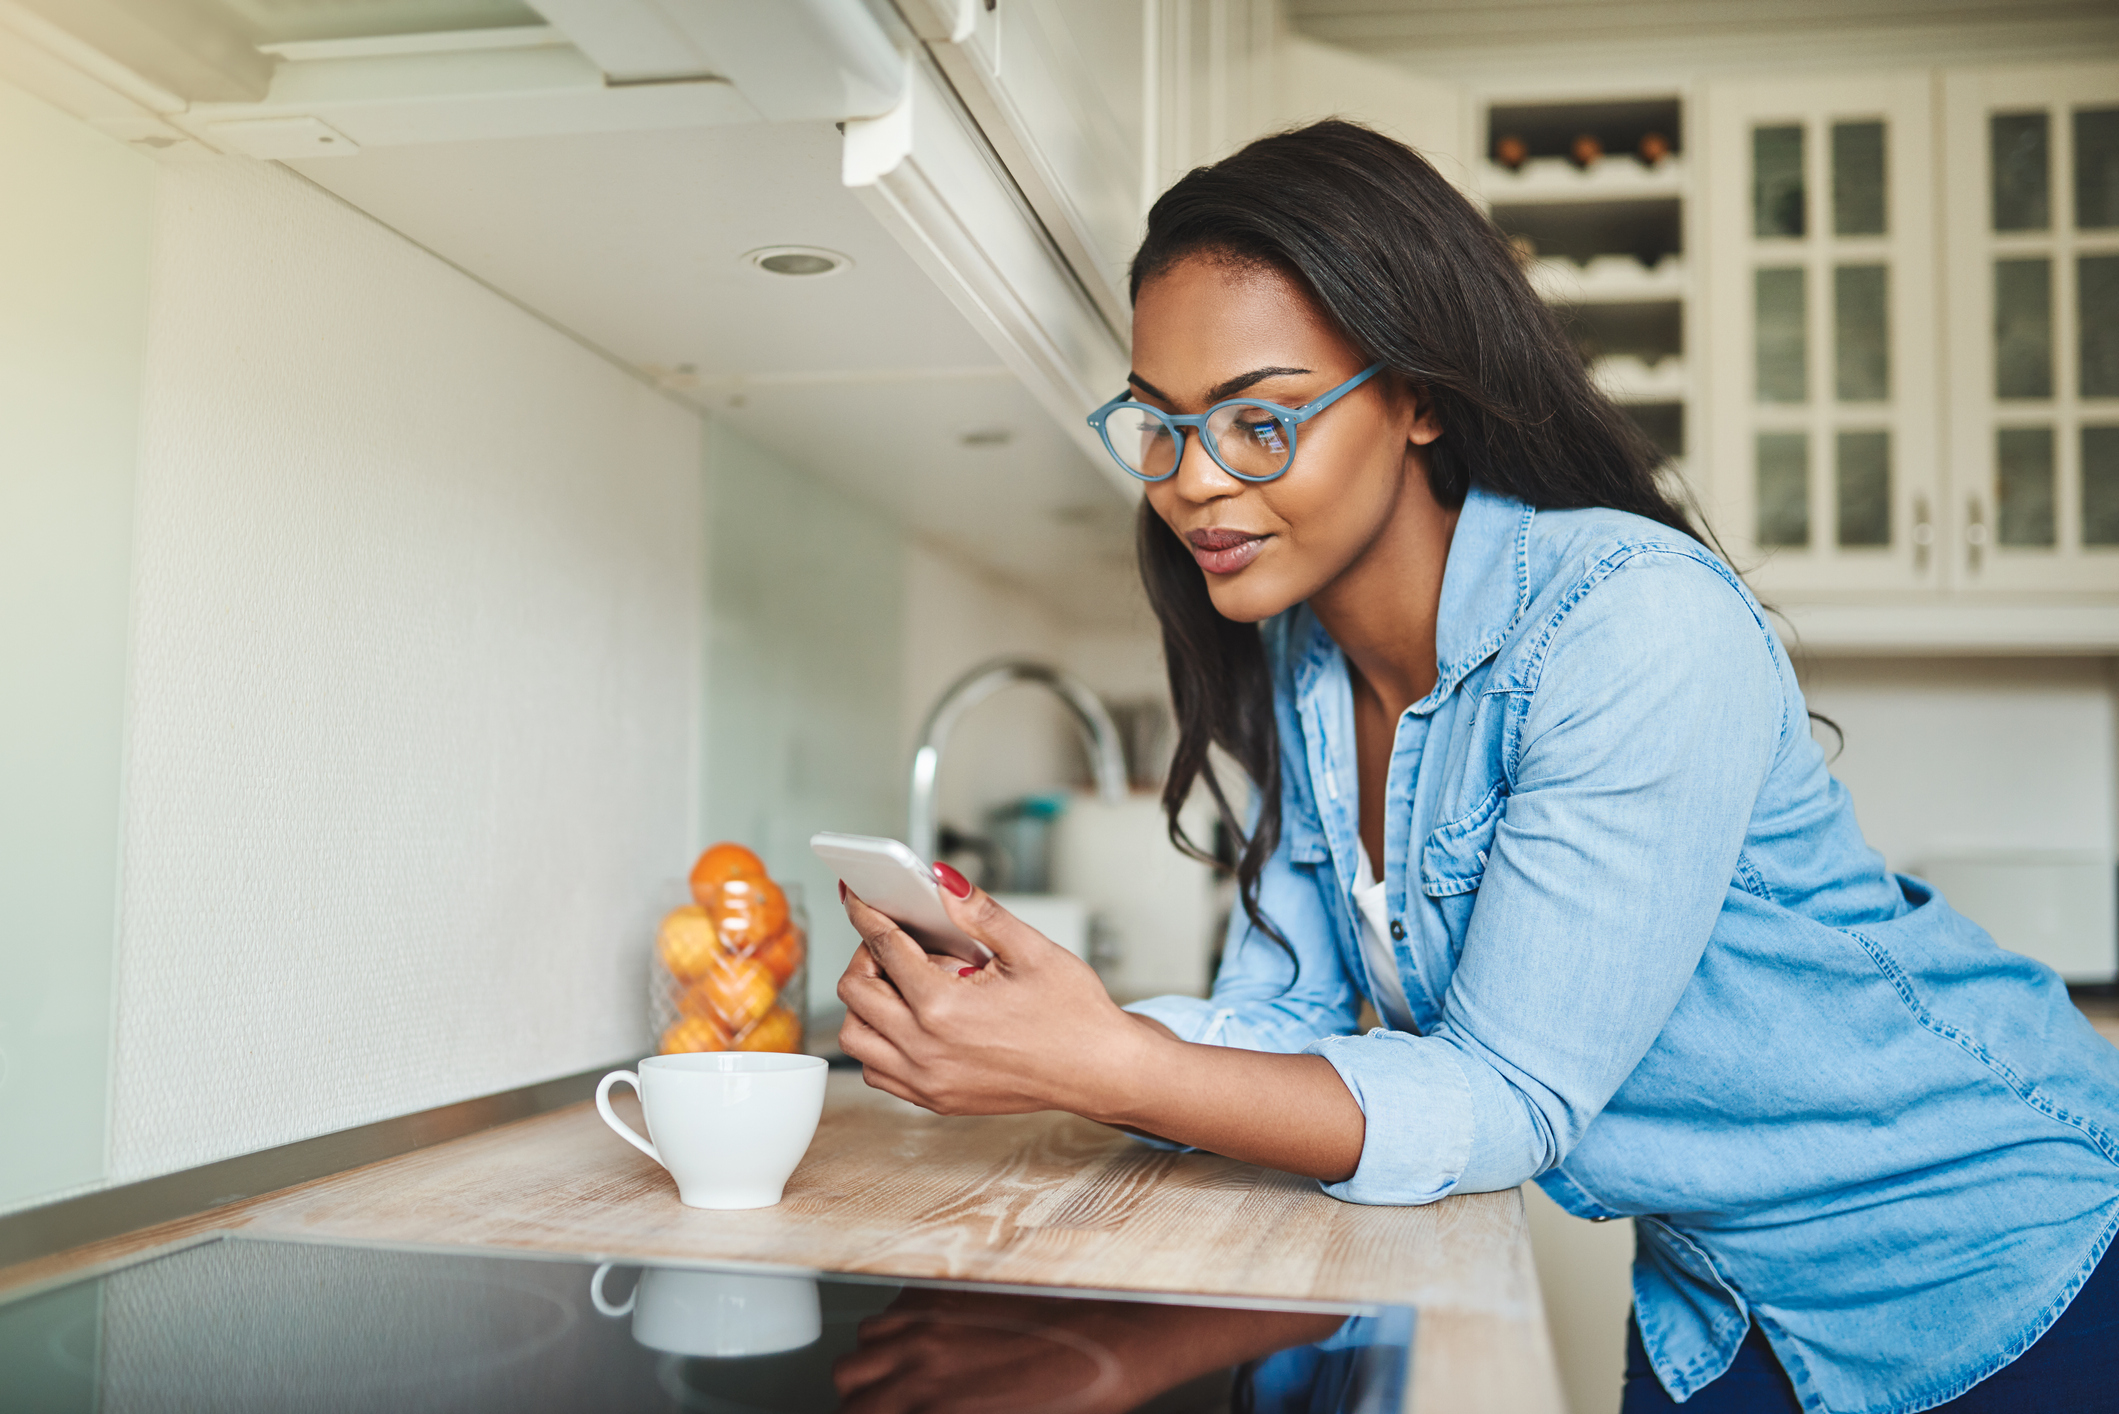 Dual heritage female business owner using her phone to update her website's SEO. She is casually dressed standing in her kitchen wearing glasses and drinking coffee